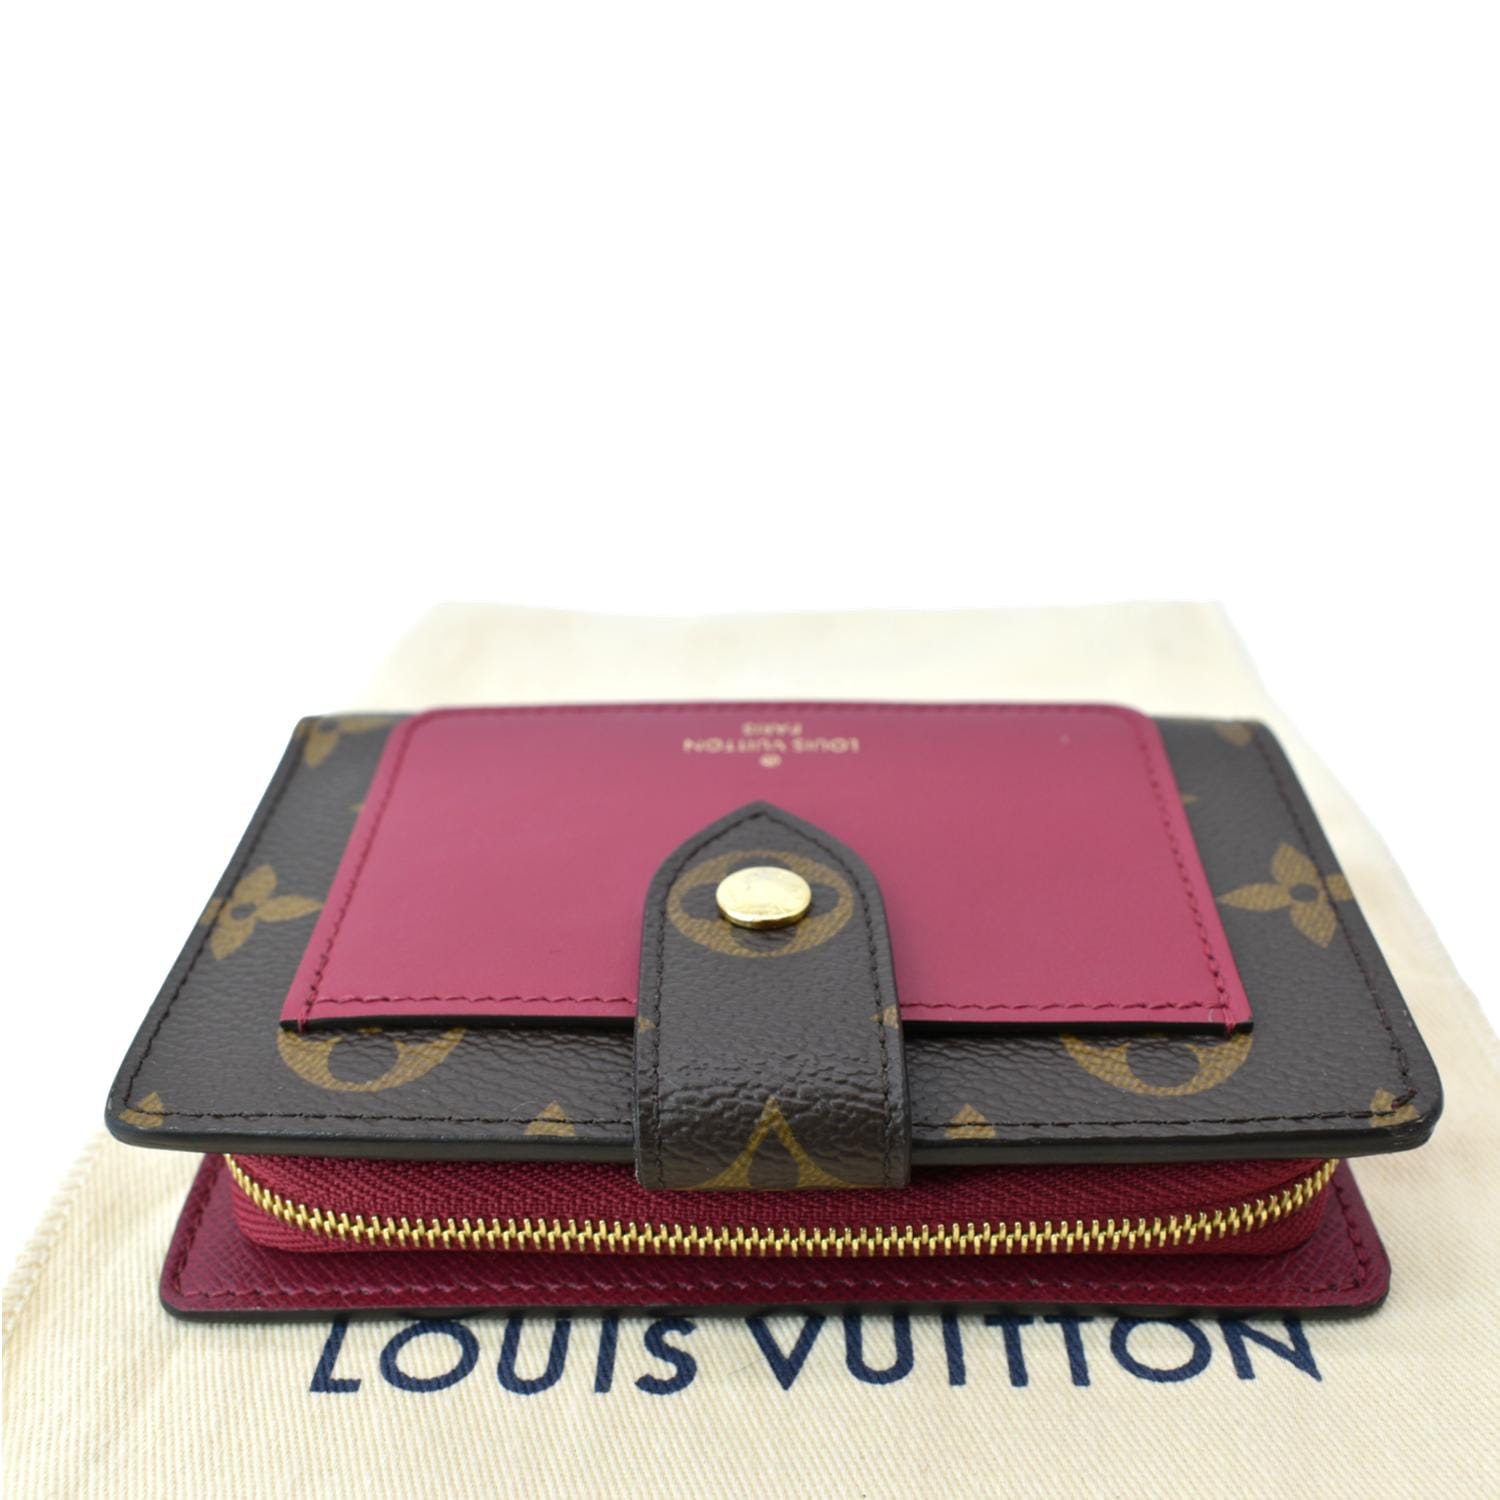 Louis Vuitton Pre-owned Women's Fabric Wallet